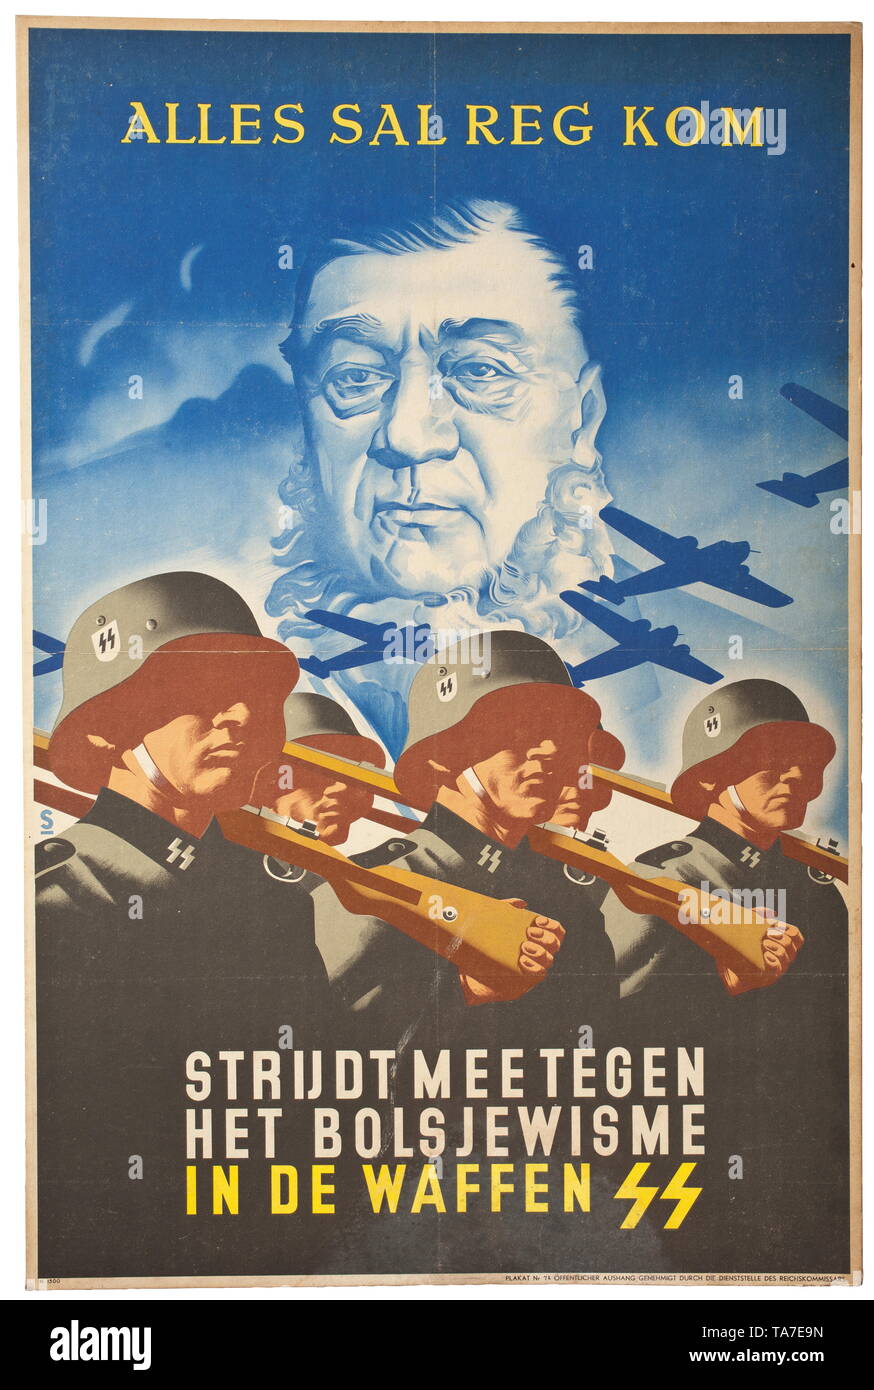 A Dutch propaganda poster for the Waffen-SS circa 1941 historic, historical, 20th century, 1930s, 1940s, Waffen-SS, armed division of the SS, armed service, armed services, NS, National Socialism, Nazism, Third Reich, German Reich, Germany, military, militaria, utensil, piece of equipment, utensils, object, objects, stills, clipping, clippings, cut out, cut-out, cut-outs, fascism, fascistic, National Socialist, Nazi, Nazi period, Editorial-Use-Only Stock Photo